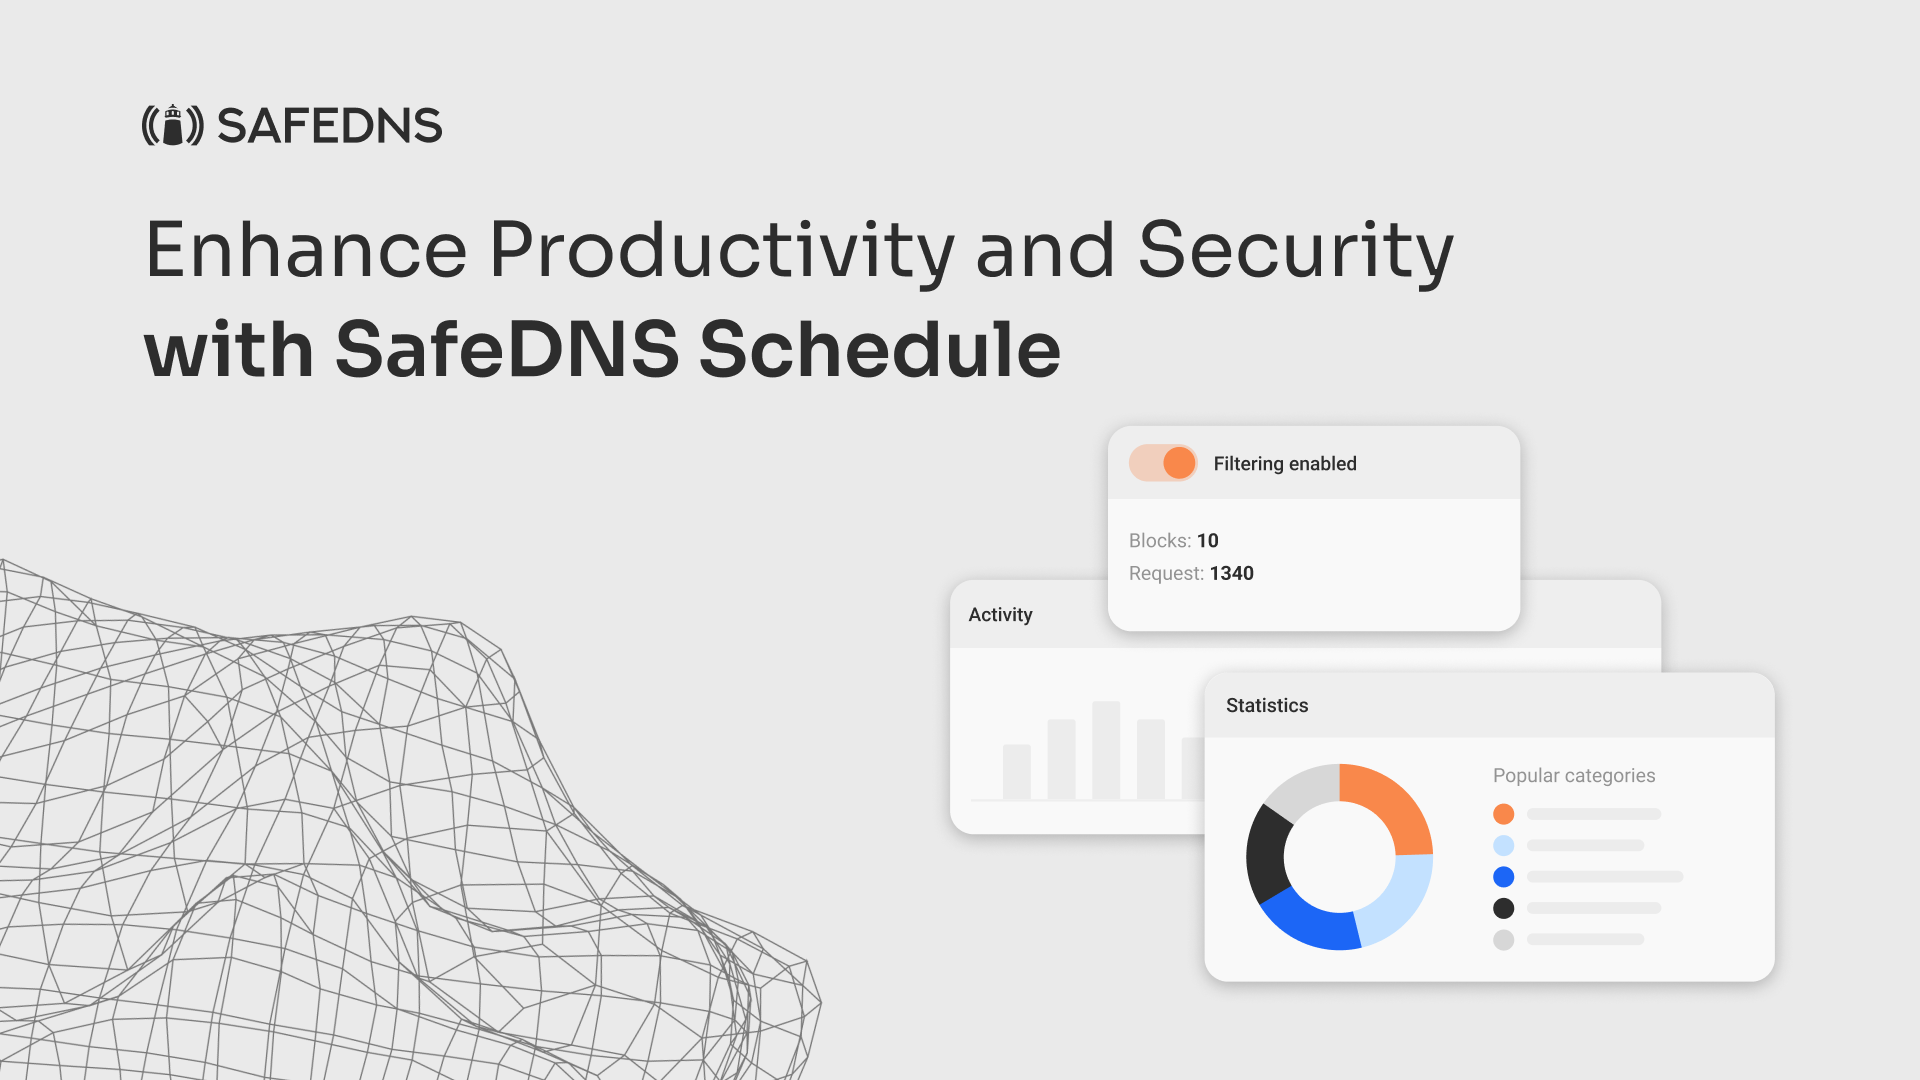 Enhance Productivity and Security with SafeDNS Schedule